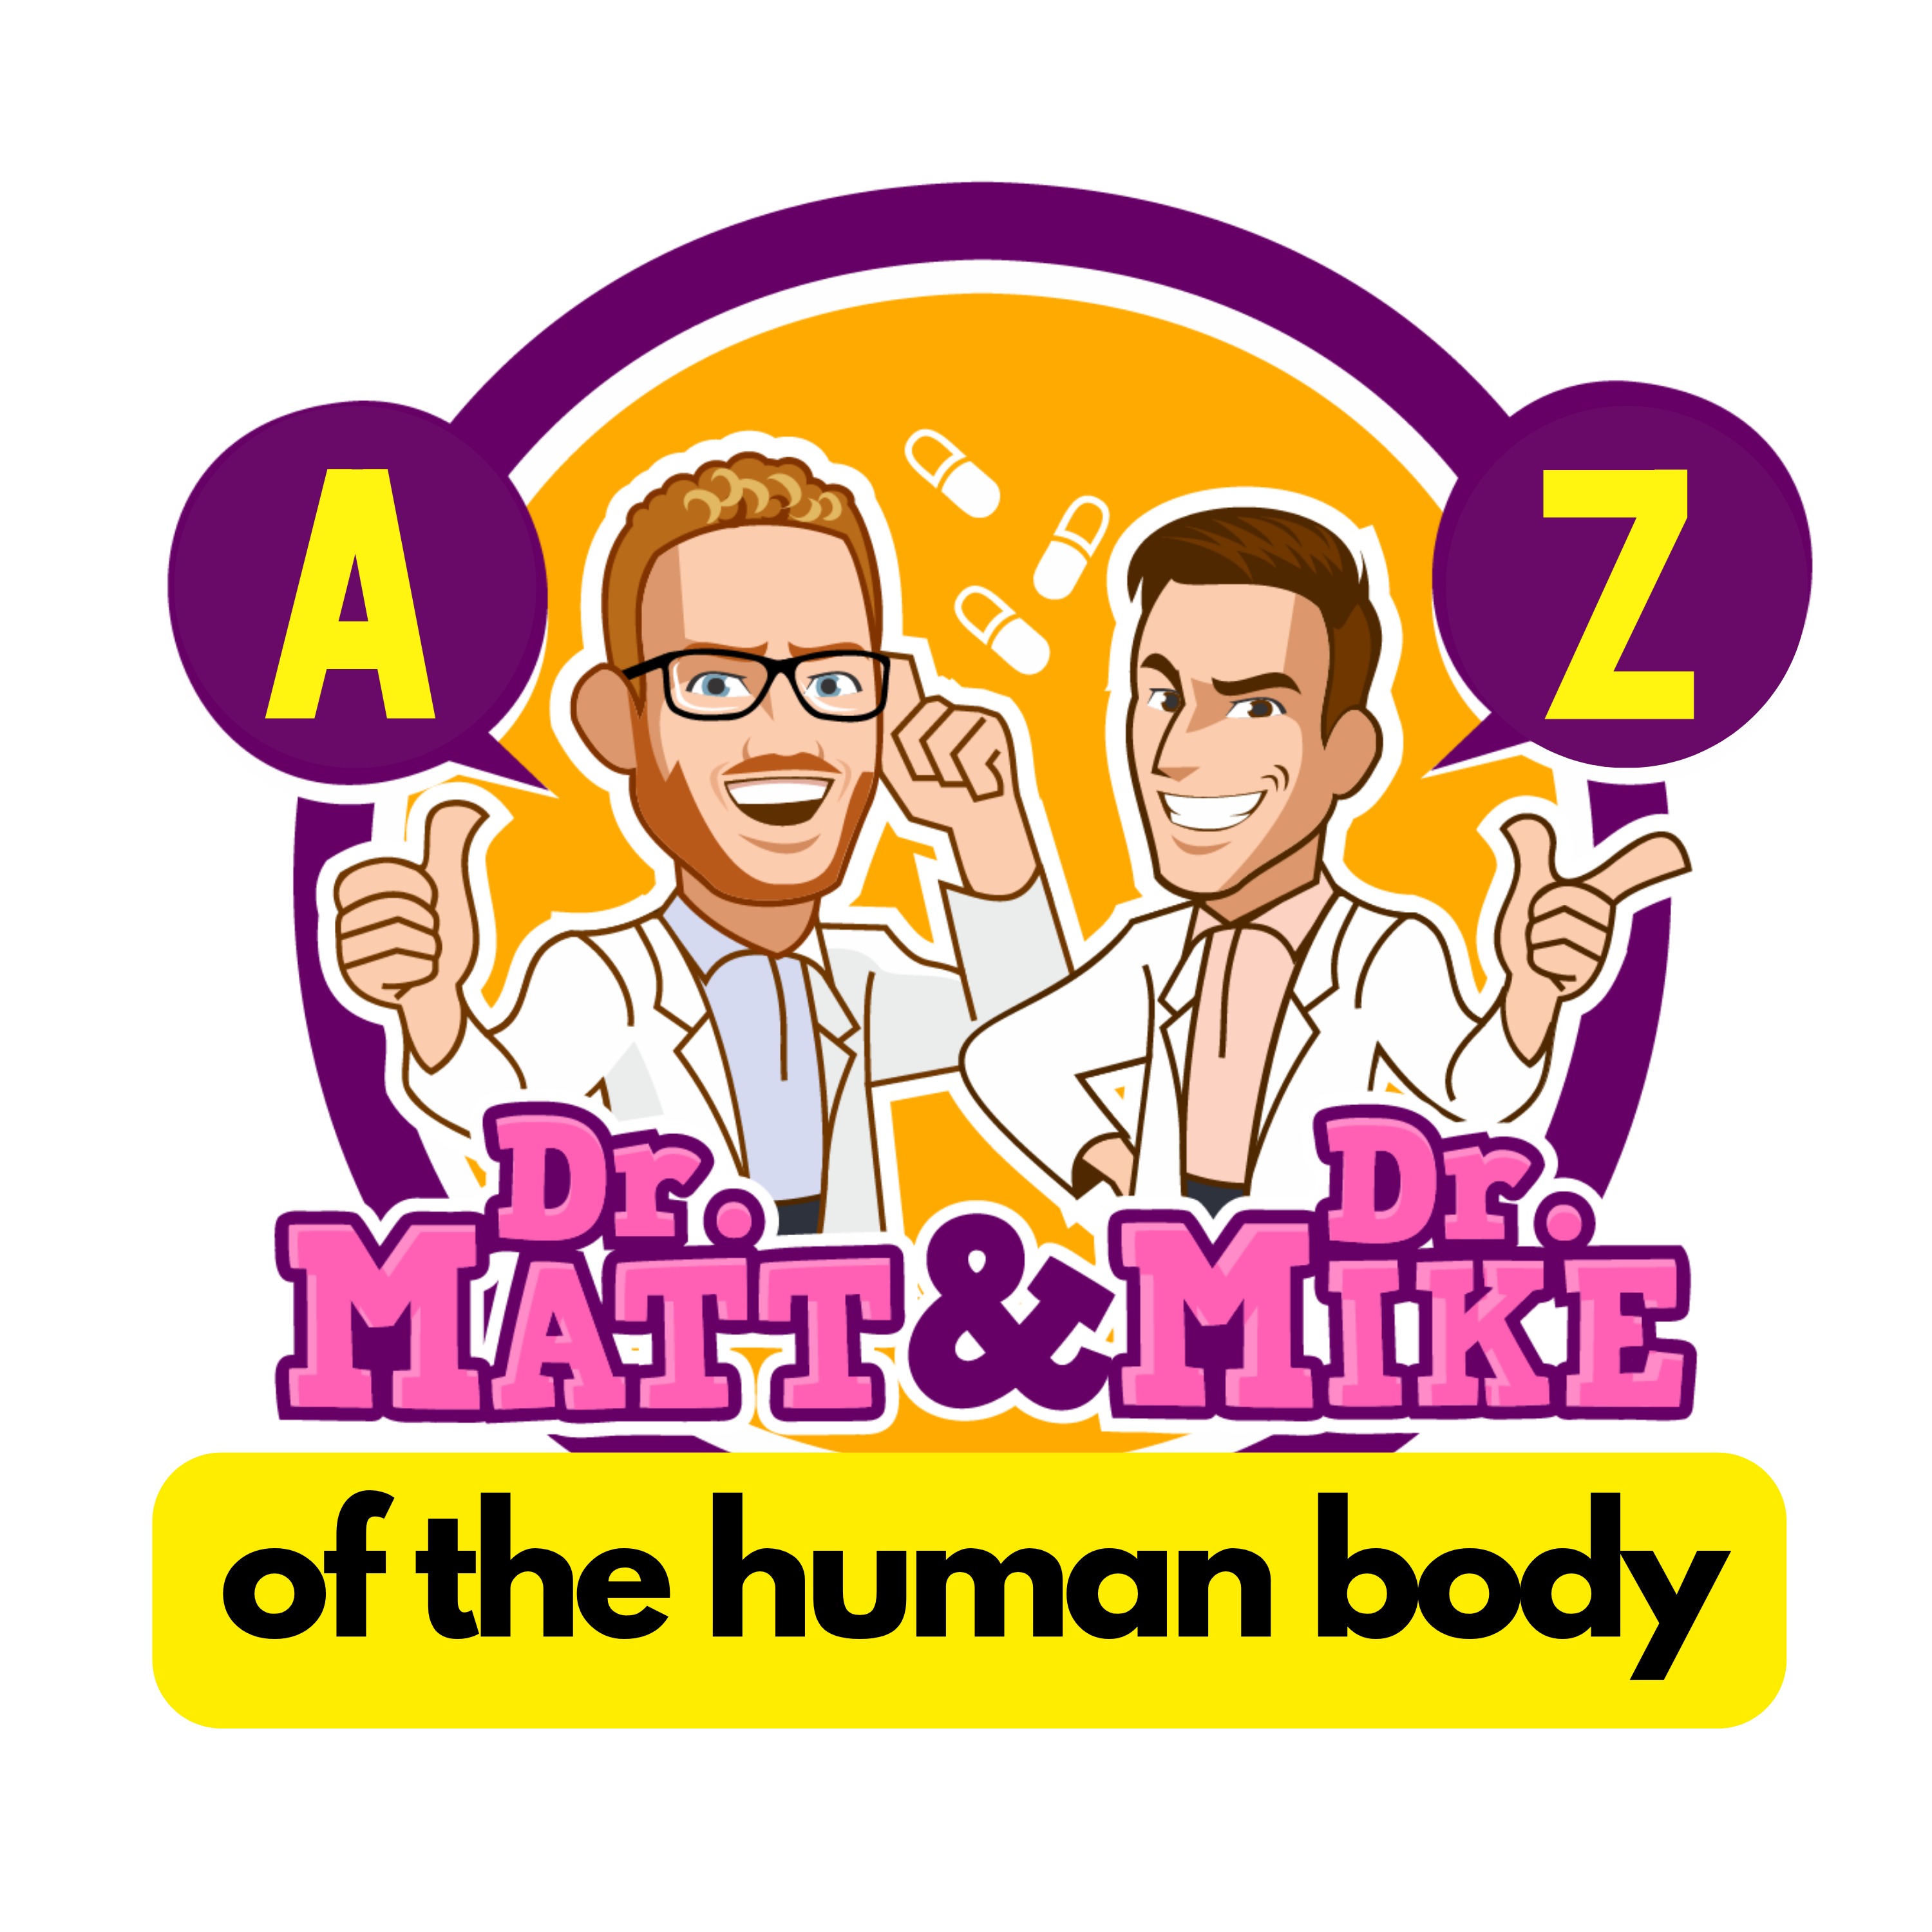 ABO Blood Types | A-Z of the Human Body